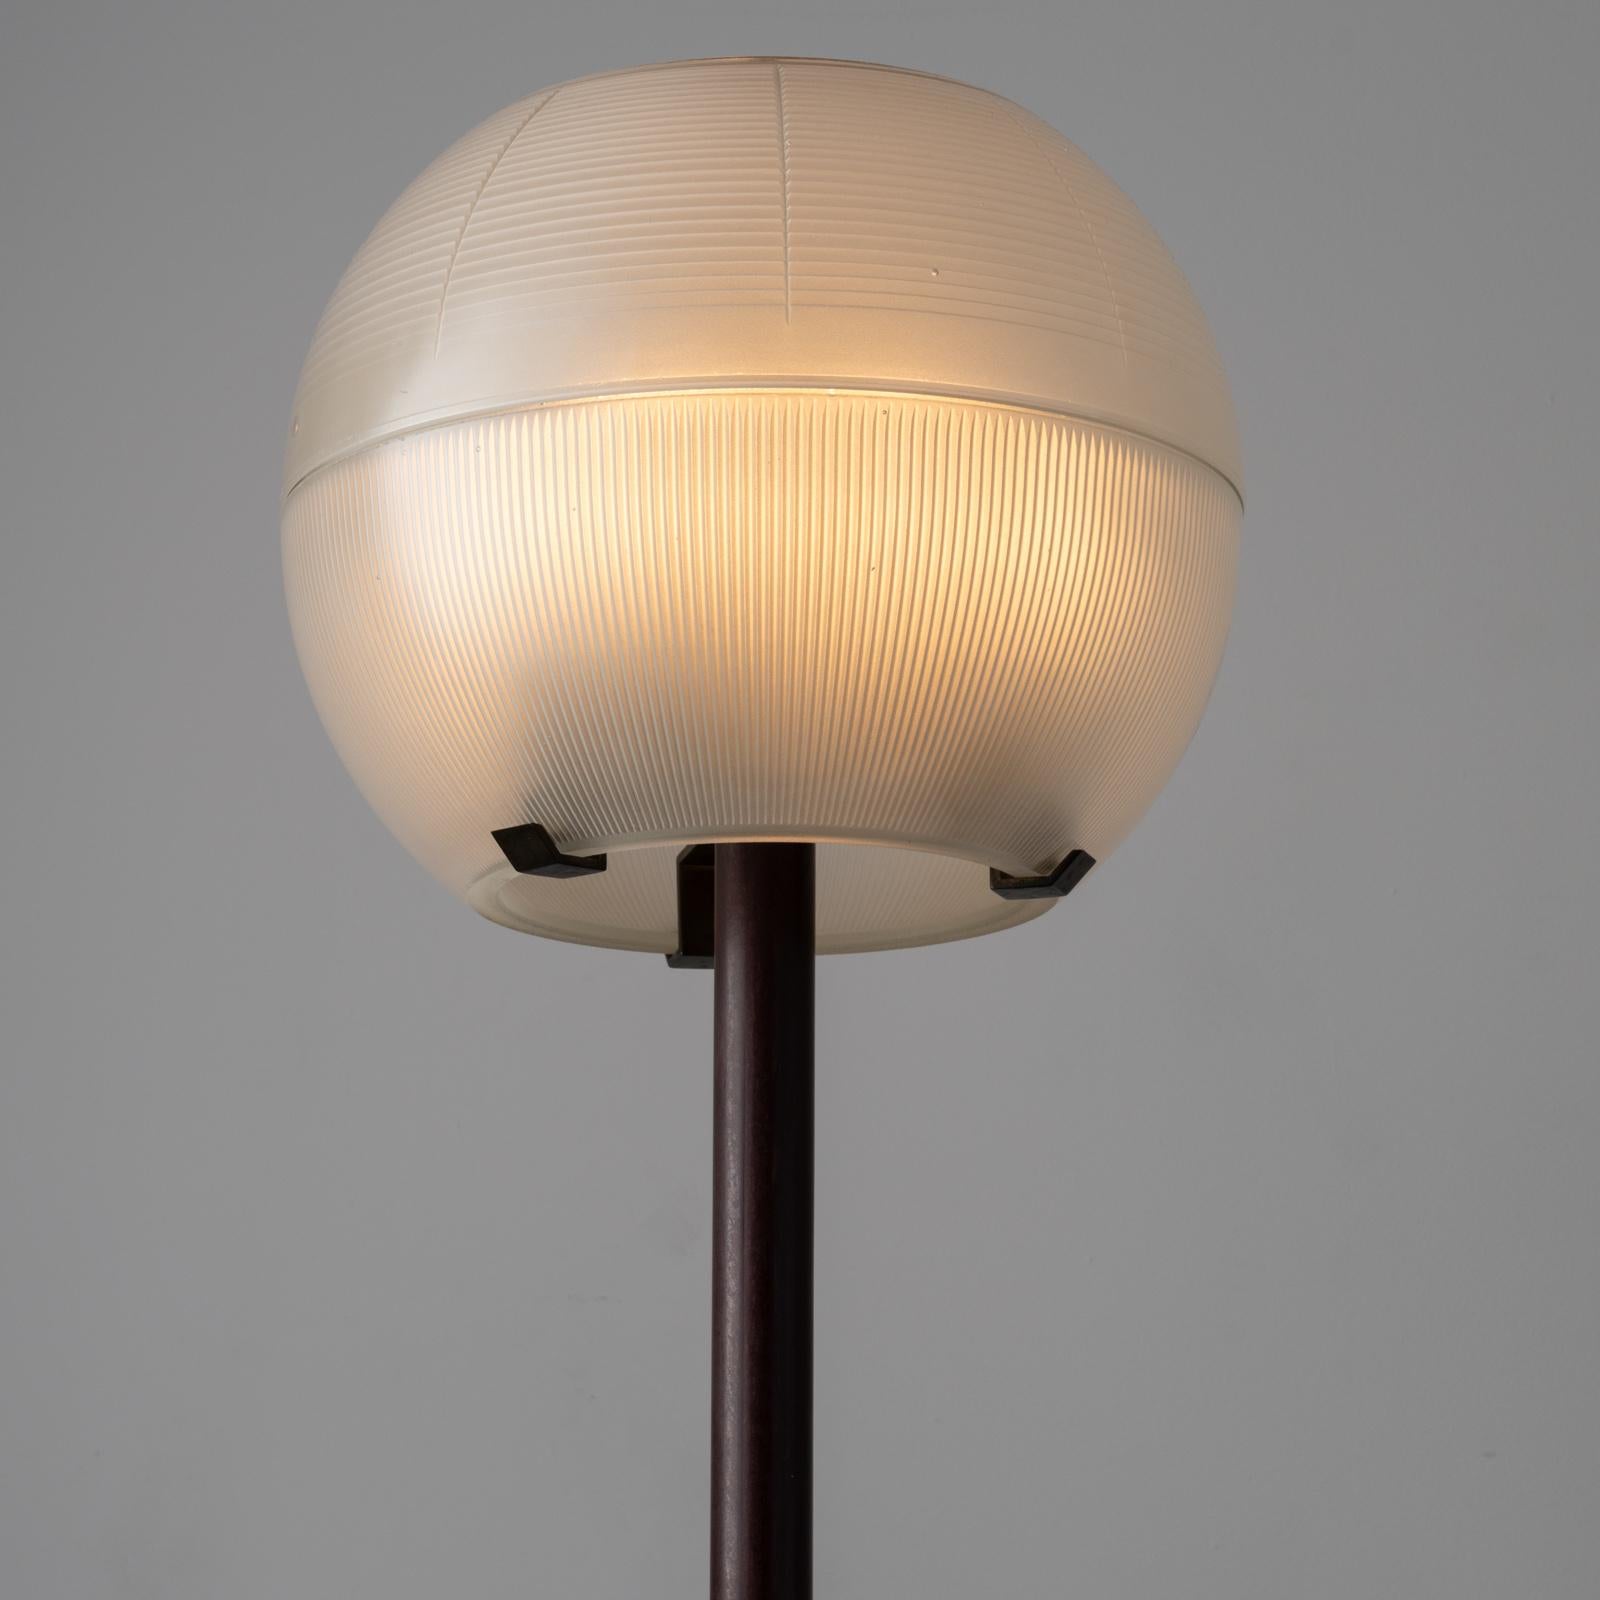 Model LTE8 floor lamp by Ignazio Gardella for Azucena. Designed and manufactured in Italy, circa 1950's. Double half sphered holophane glass makes the top of this lamp. The wooden stem is in a dark cherry stain. Darkened polished steel makes up the